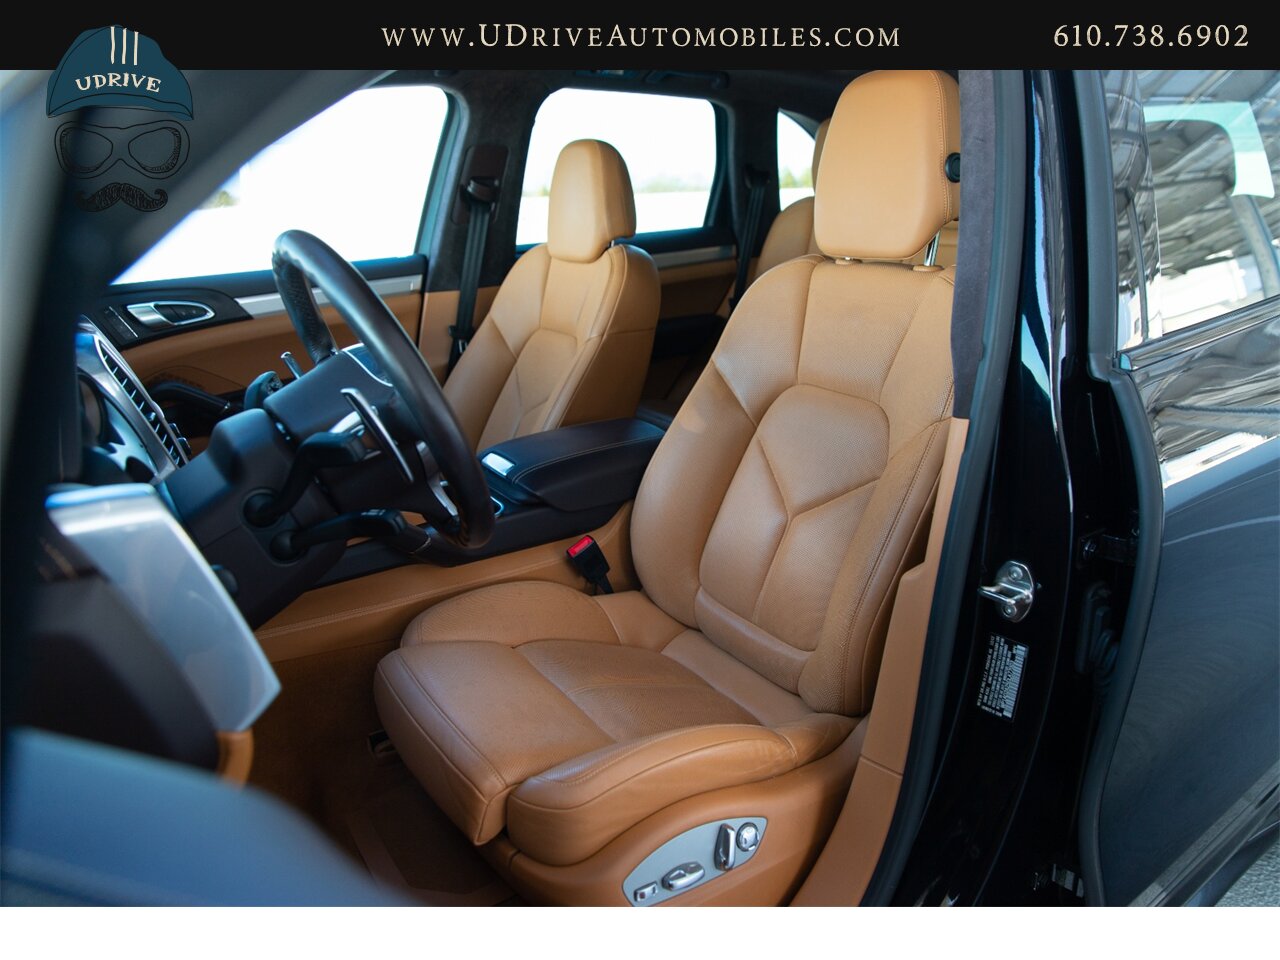 2013 Porsche Cayenne GTS Service History 1 Owner 21in Wheels  Espresso / Cognac Two Tone Leather - Photo 6 - West Chester, PA 19382